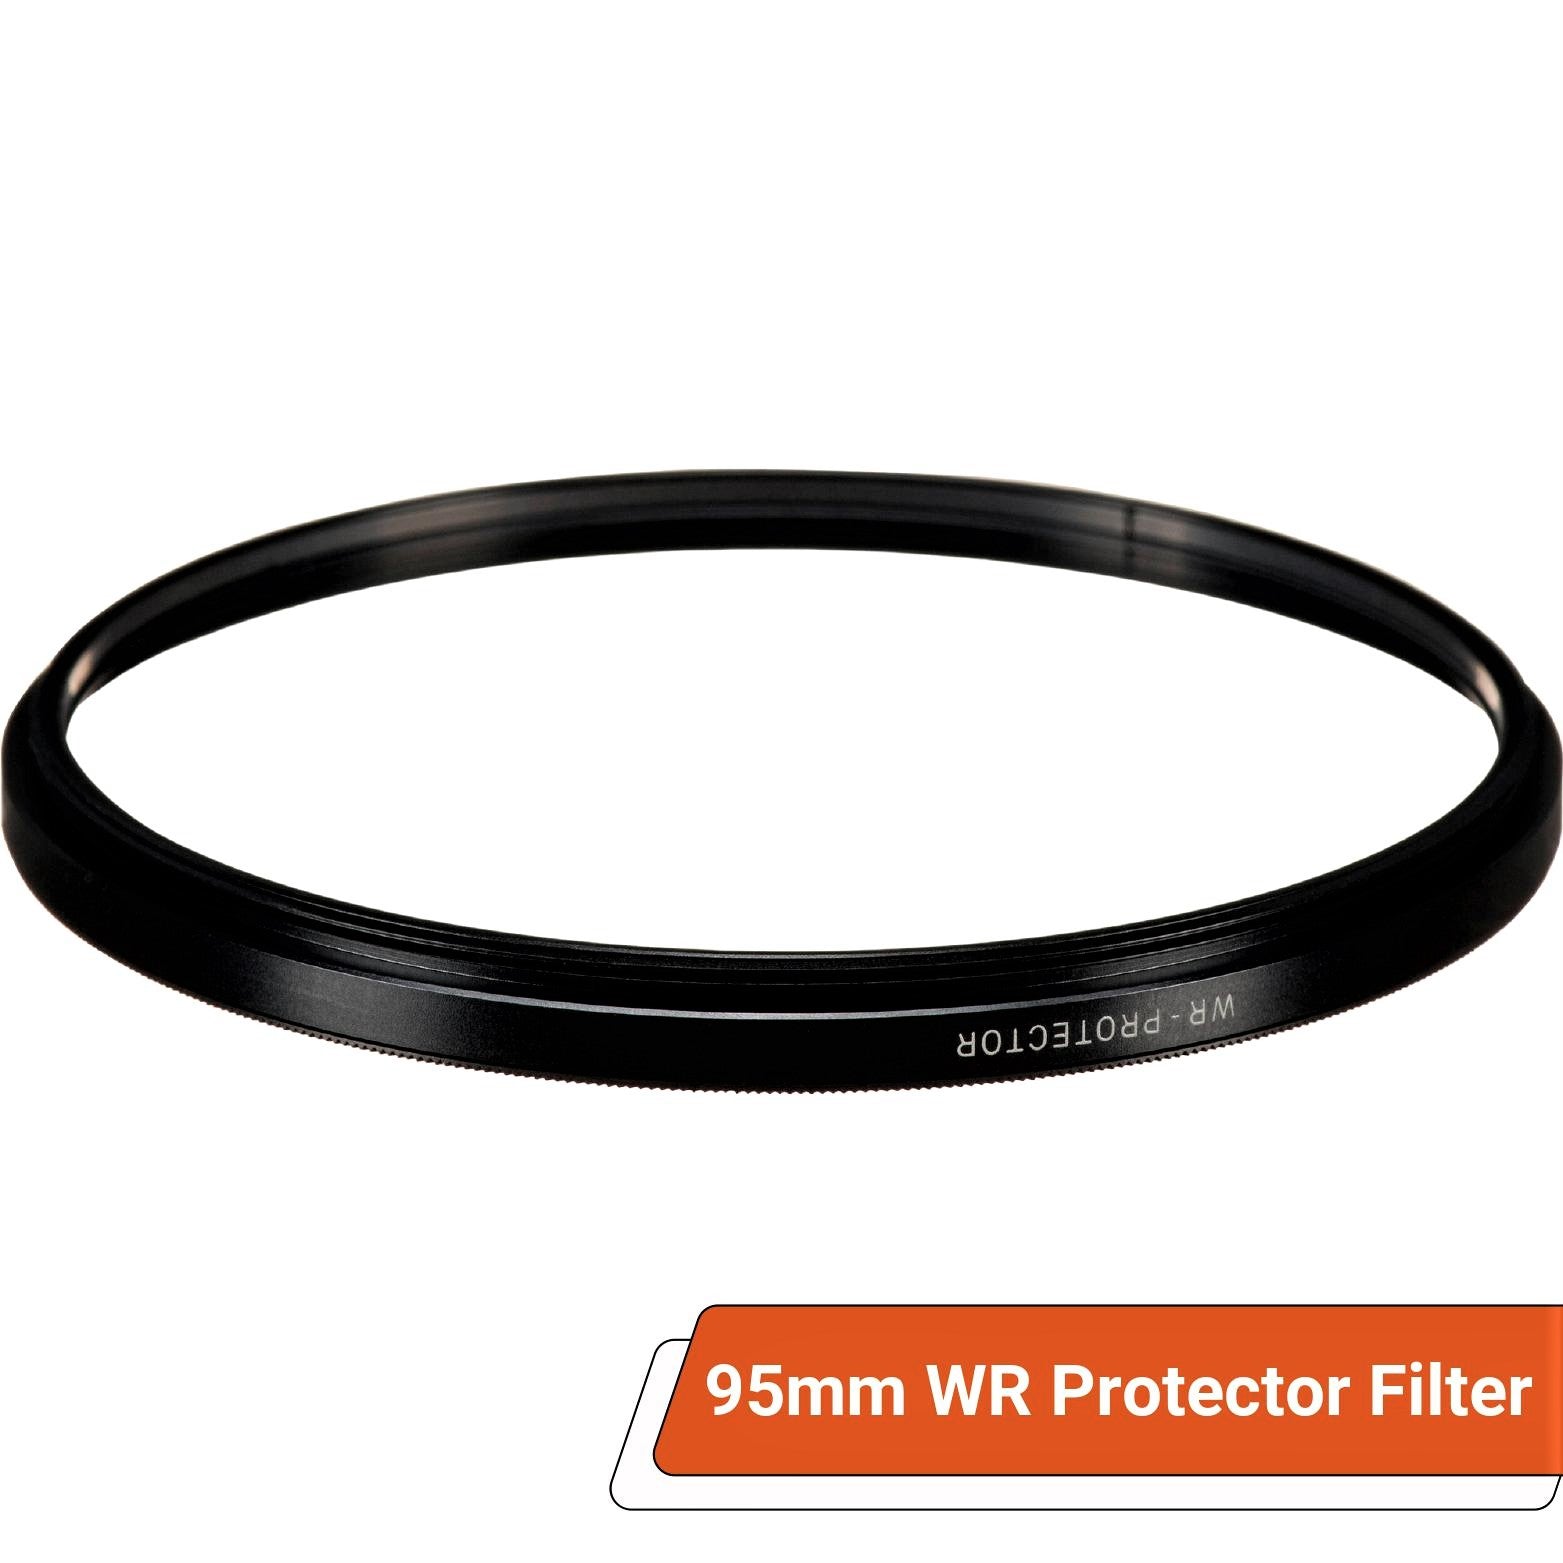 Sigma 95mm WR (Water Repellent) Protector Filter